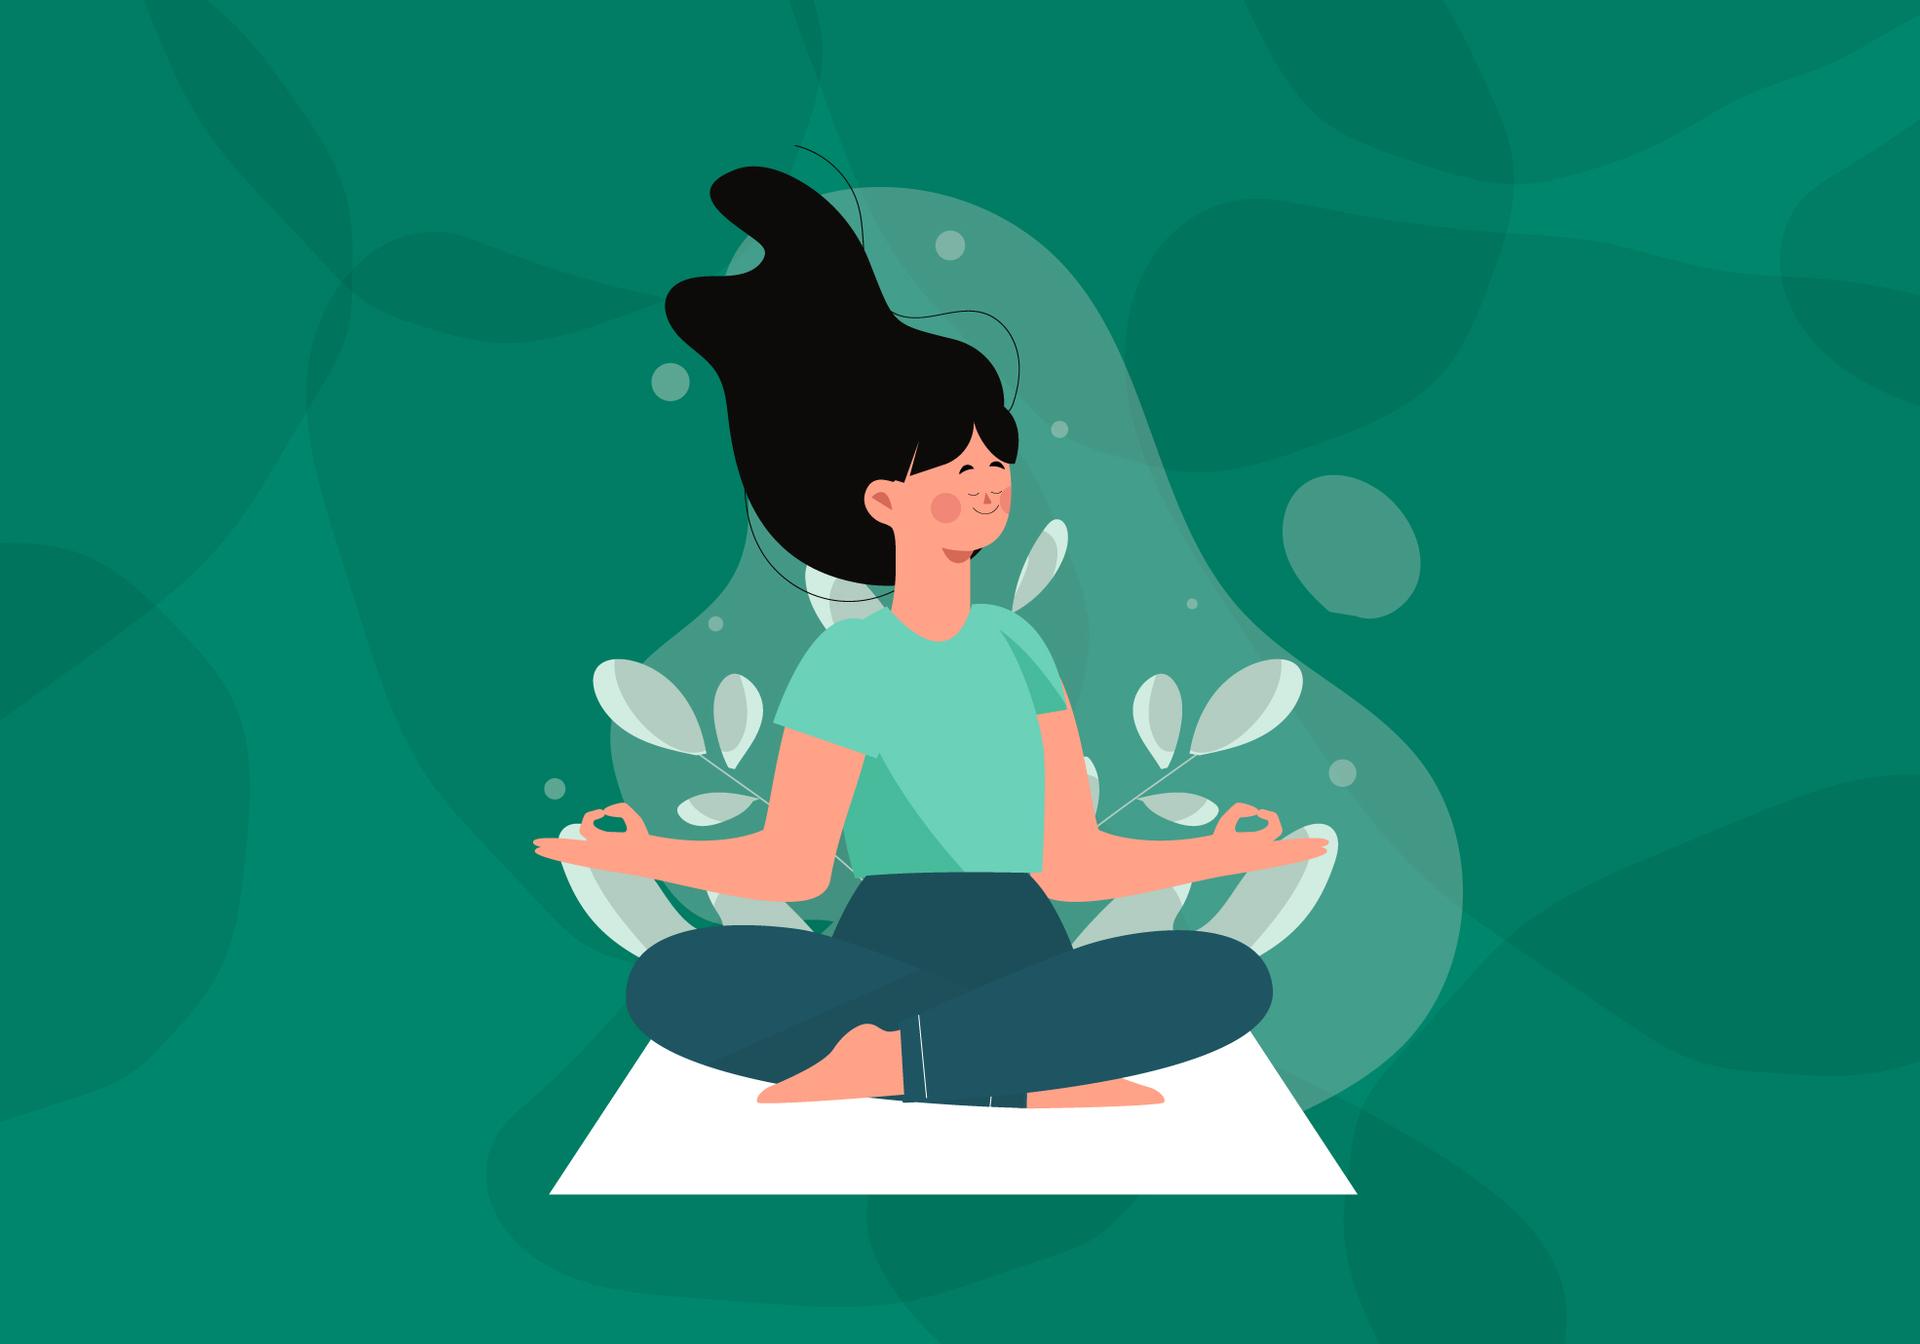 Illustration of a person with dark hair in a resting yoga pose on an illustrated green background